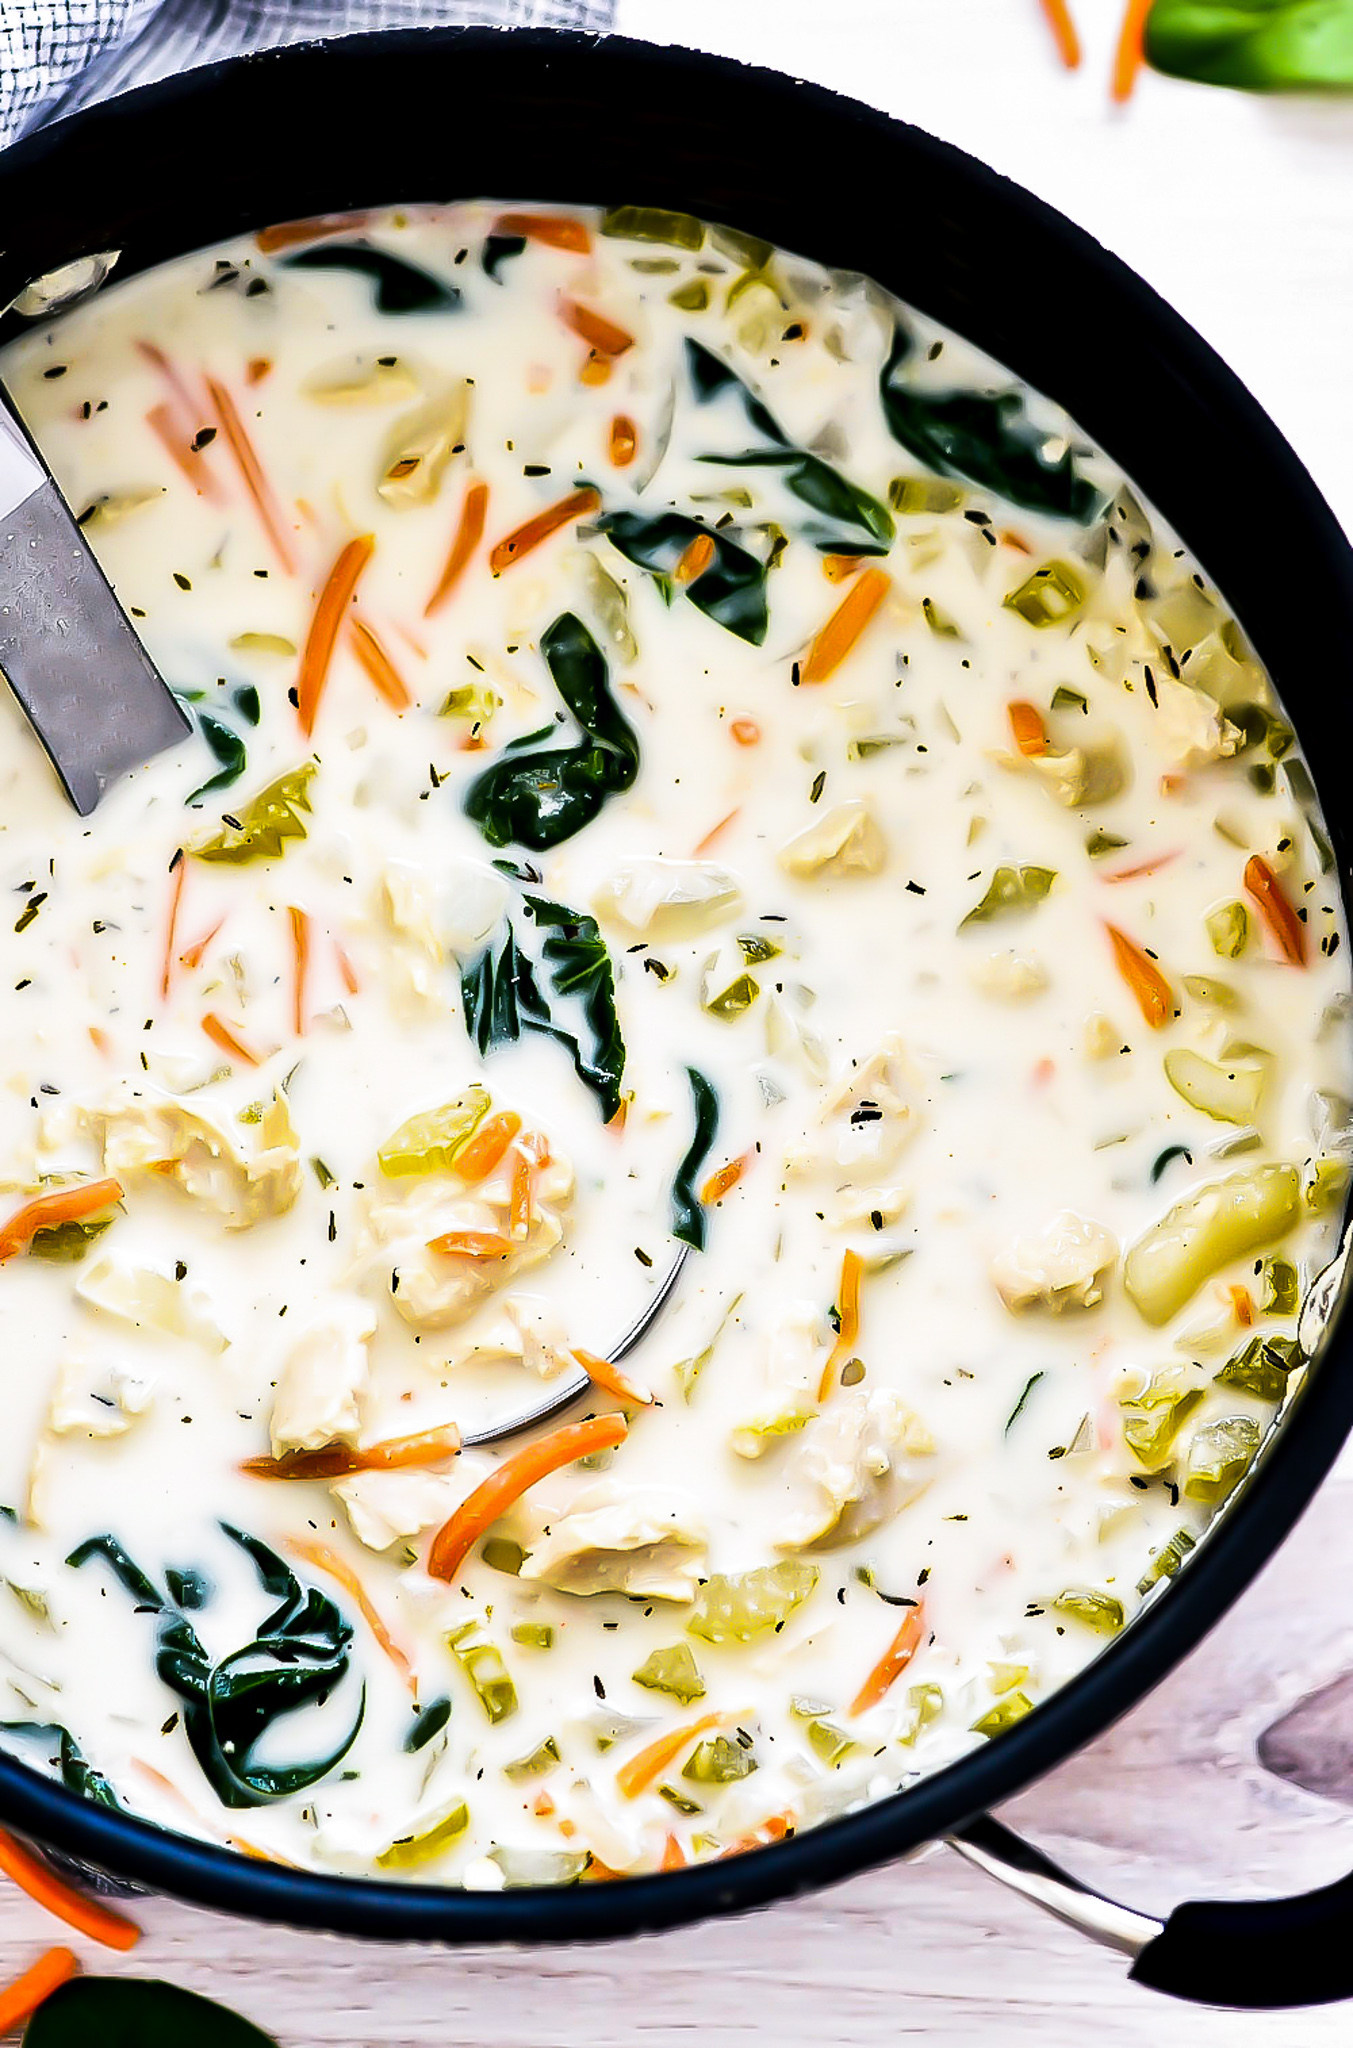 Chicken Gnocchi Soup is filled with tender chicken breast, potato gnocchi, carrots, spinach, celery and onion in a creamy chicken broth. Life-in-the-Lofthouse.com